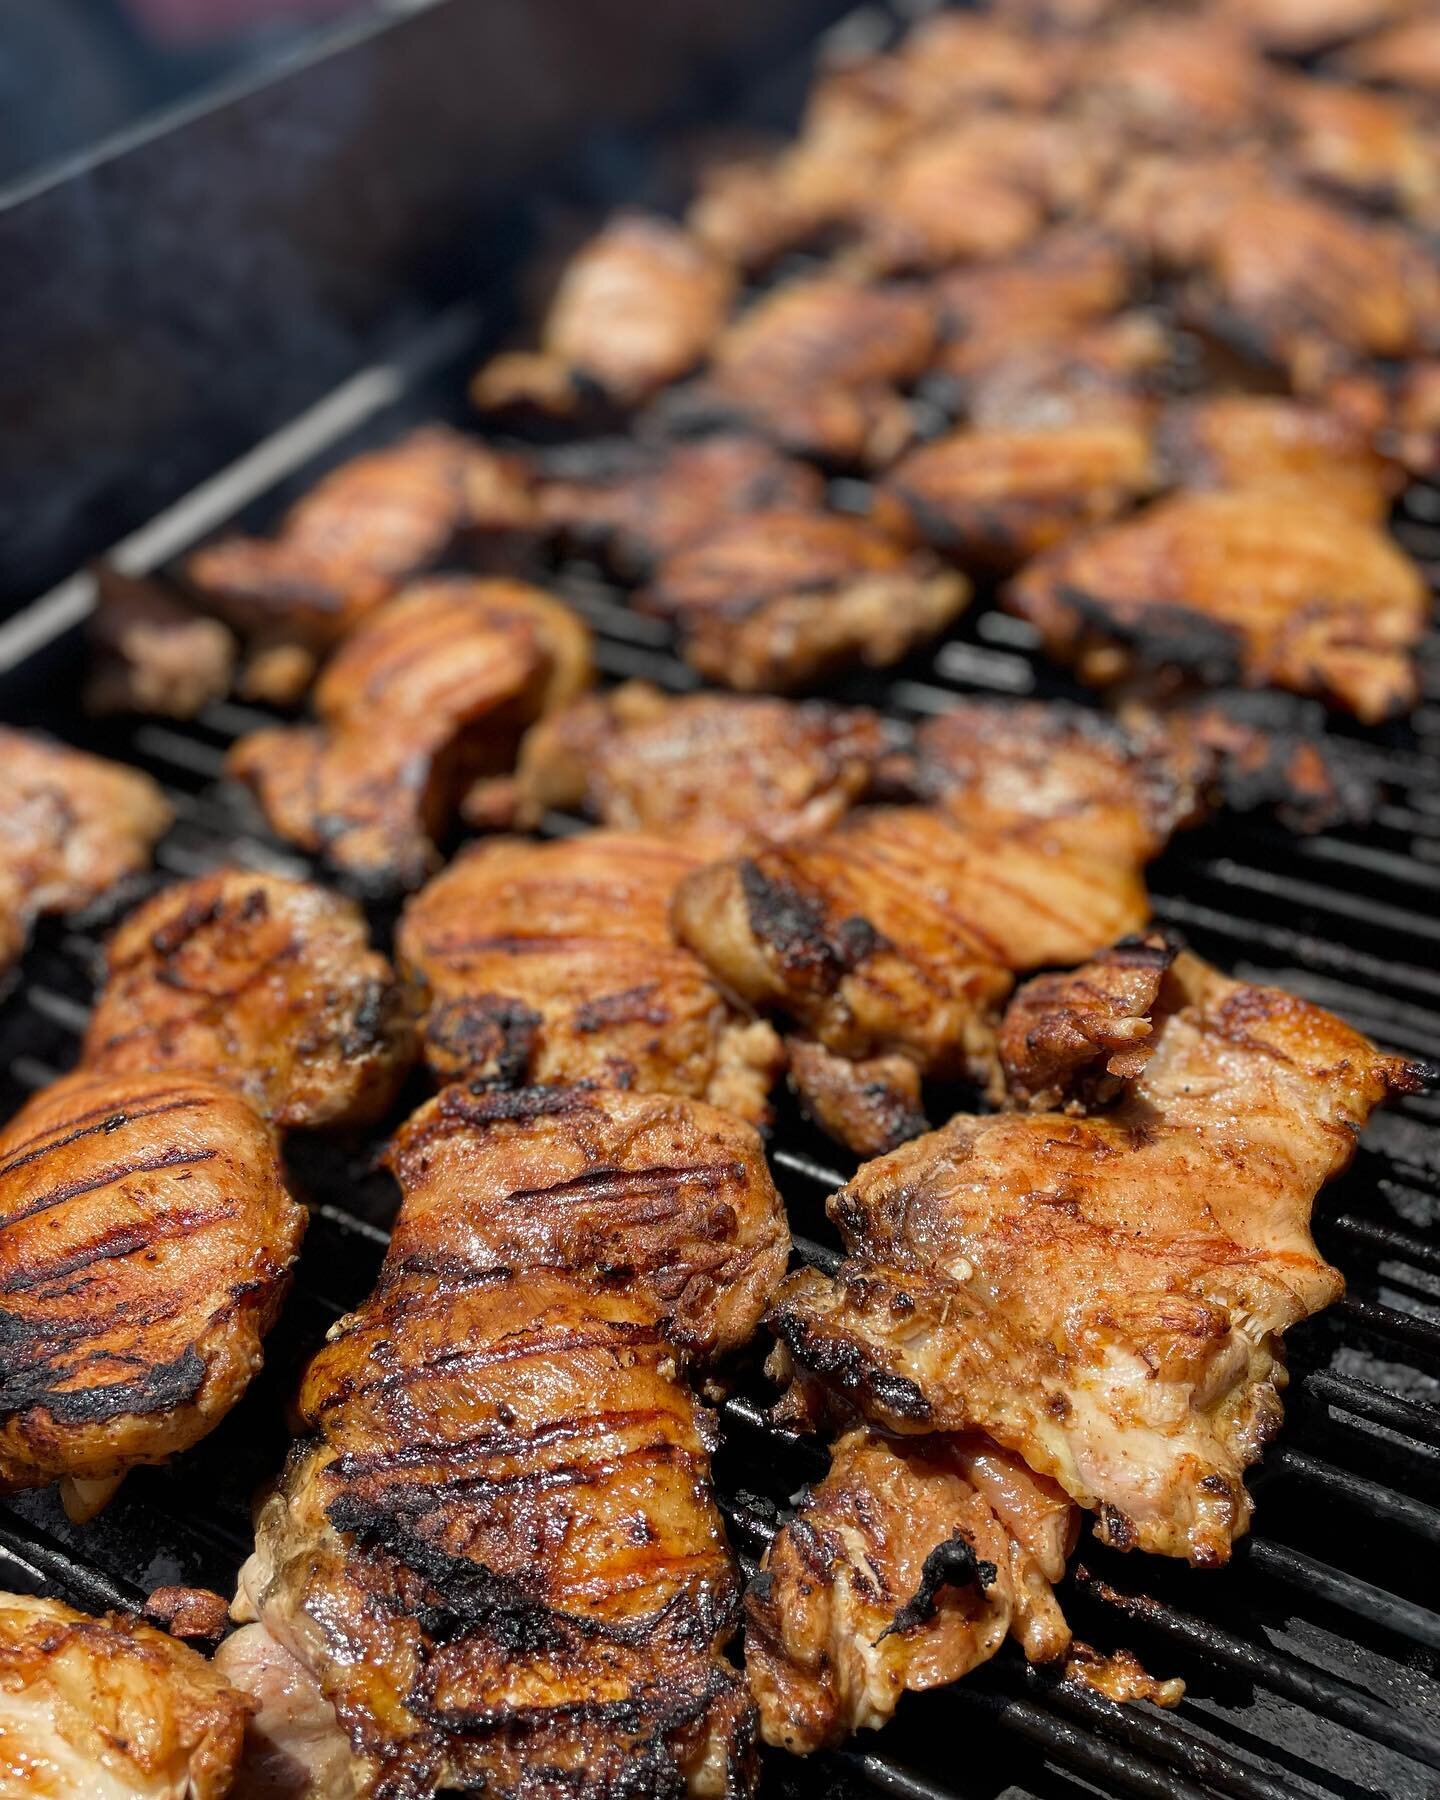 It&rsquo;s time for backyard cook outs and outdoor celebrations. We love the fresh ingredients available in our warm months ☀️ Check out some of our favorite outdoor foods 

-Fajita Chicken served with a full taco set up 
-Soy Glazed Grilled Peaches 